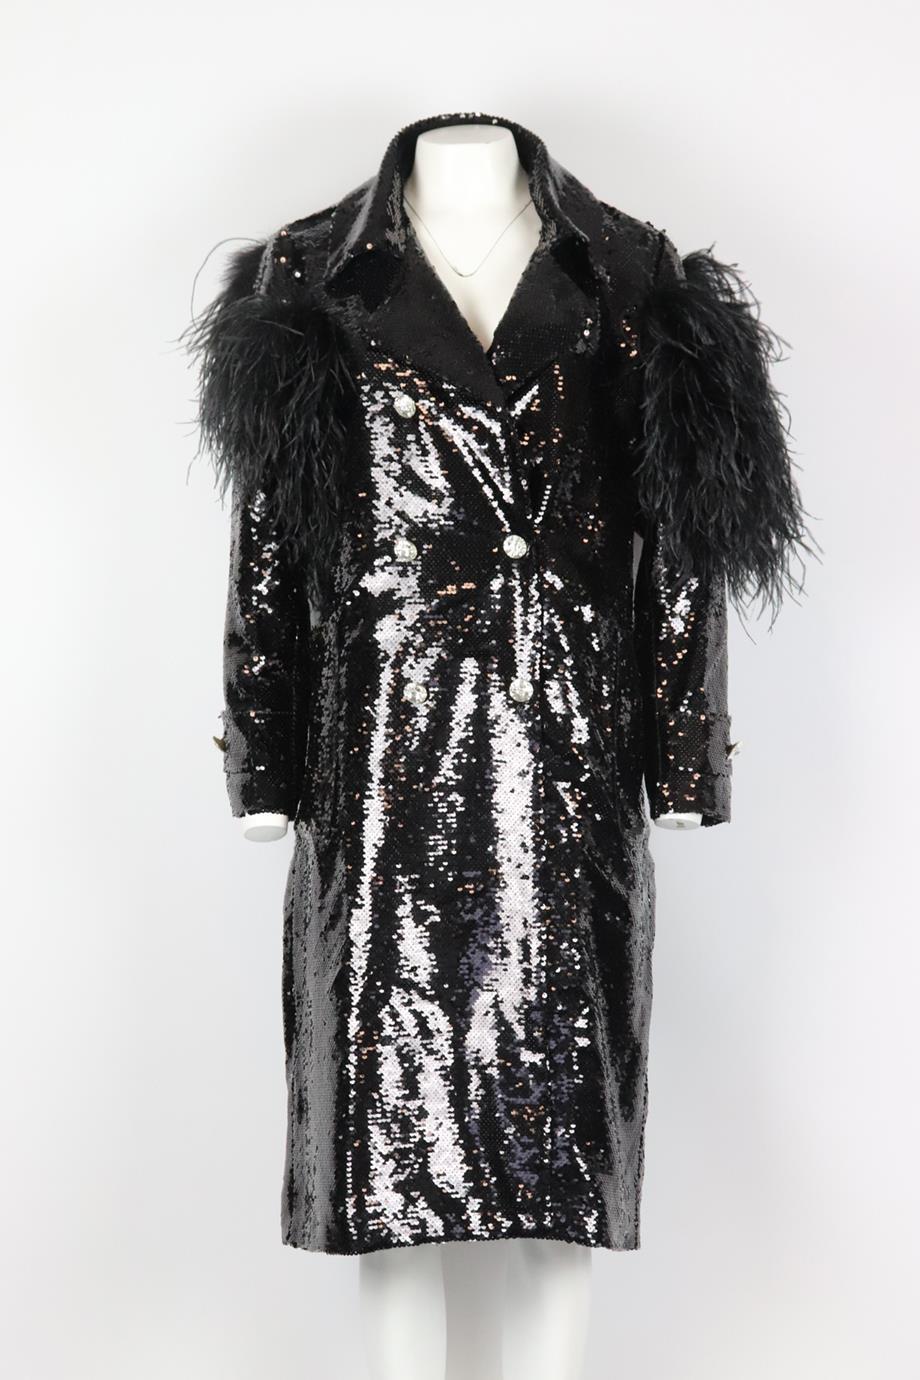 Germanier feather trimmed sequined chiffon coat. Black. Long sleeve, v-neck. Button fastening at front. 100% Polyester. Size: Large (UK 12, US 8, FR 40, IT 44). Shoulder to shoulder: 18 in. Bust: 40 in. Waist: 42 in. Hips: 45 in. Length: 45 in. Very